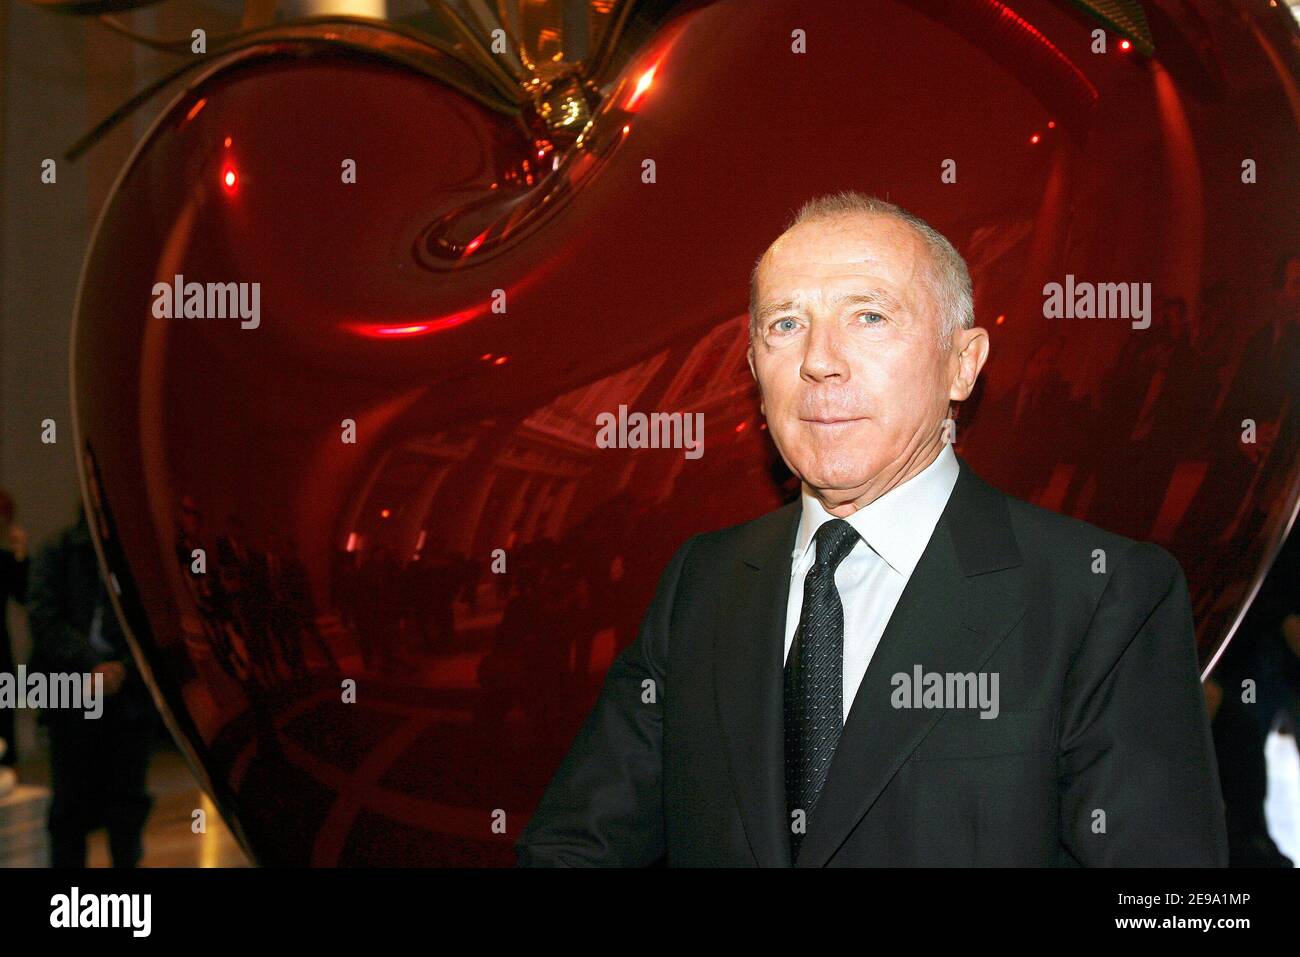 Pinault-Printemps-Redoute president Francois Pinault poses inside Palazzo Grassi (Pinault Fondation) in Venice, Italy, on April 28, 2006. Photo by Mehdi Taamallah/ABACAPRESS.COM Stock Photo